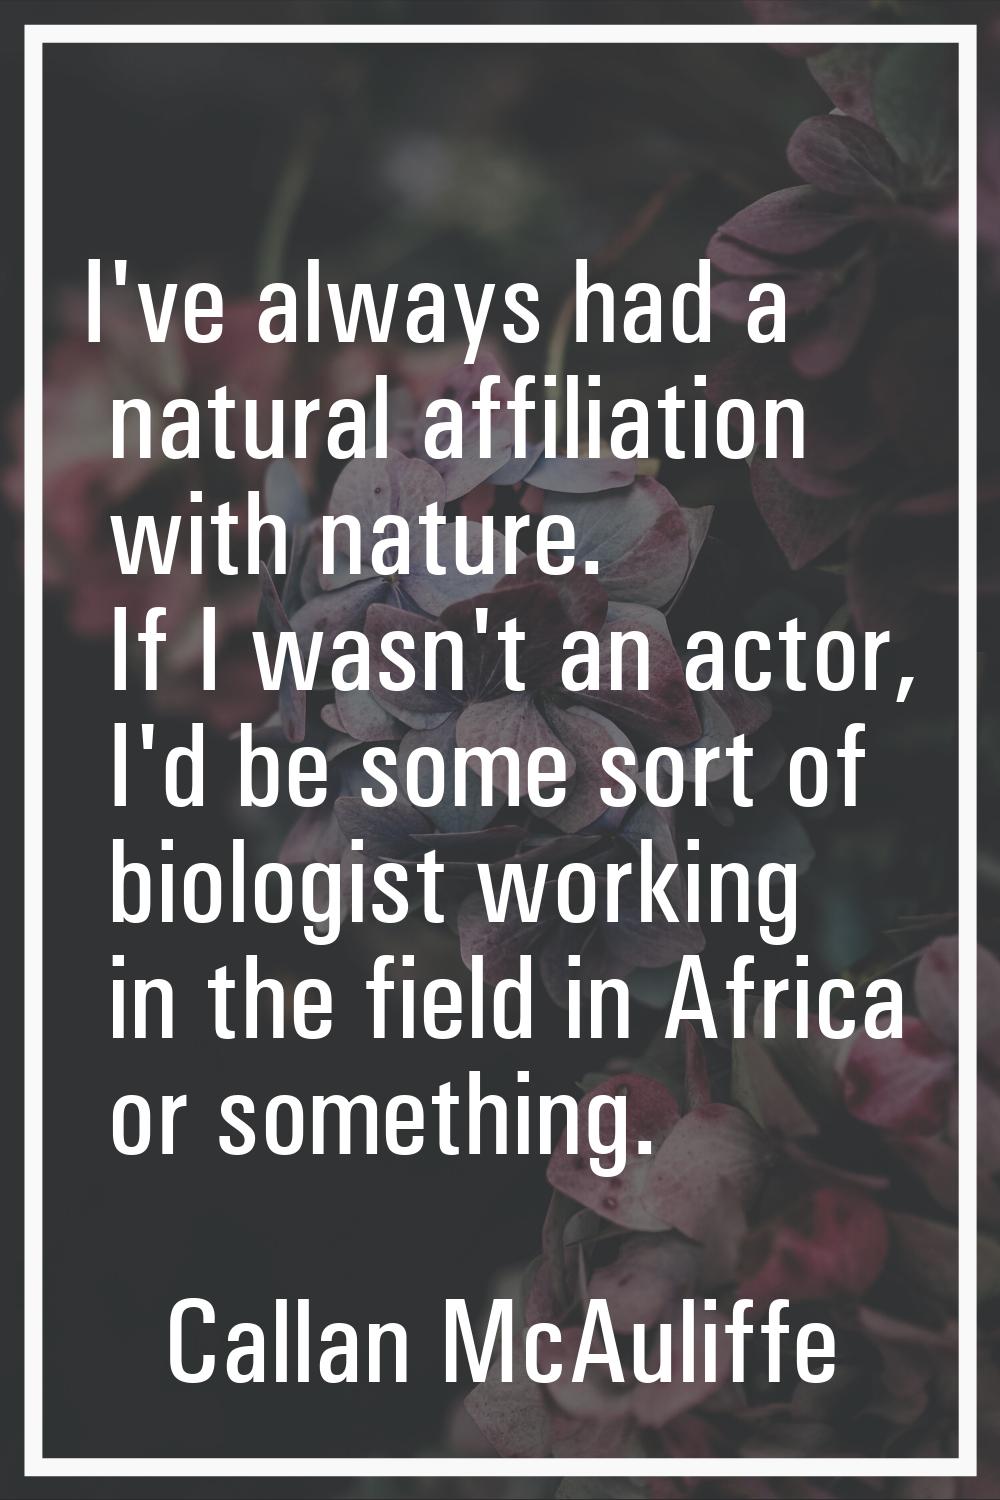 I've always had a natural affiliation with nature. If I wasn't an actor, I'd be some sort of biolog